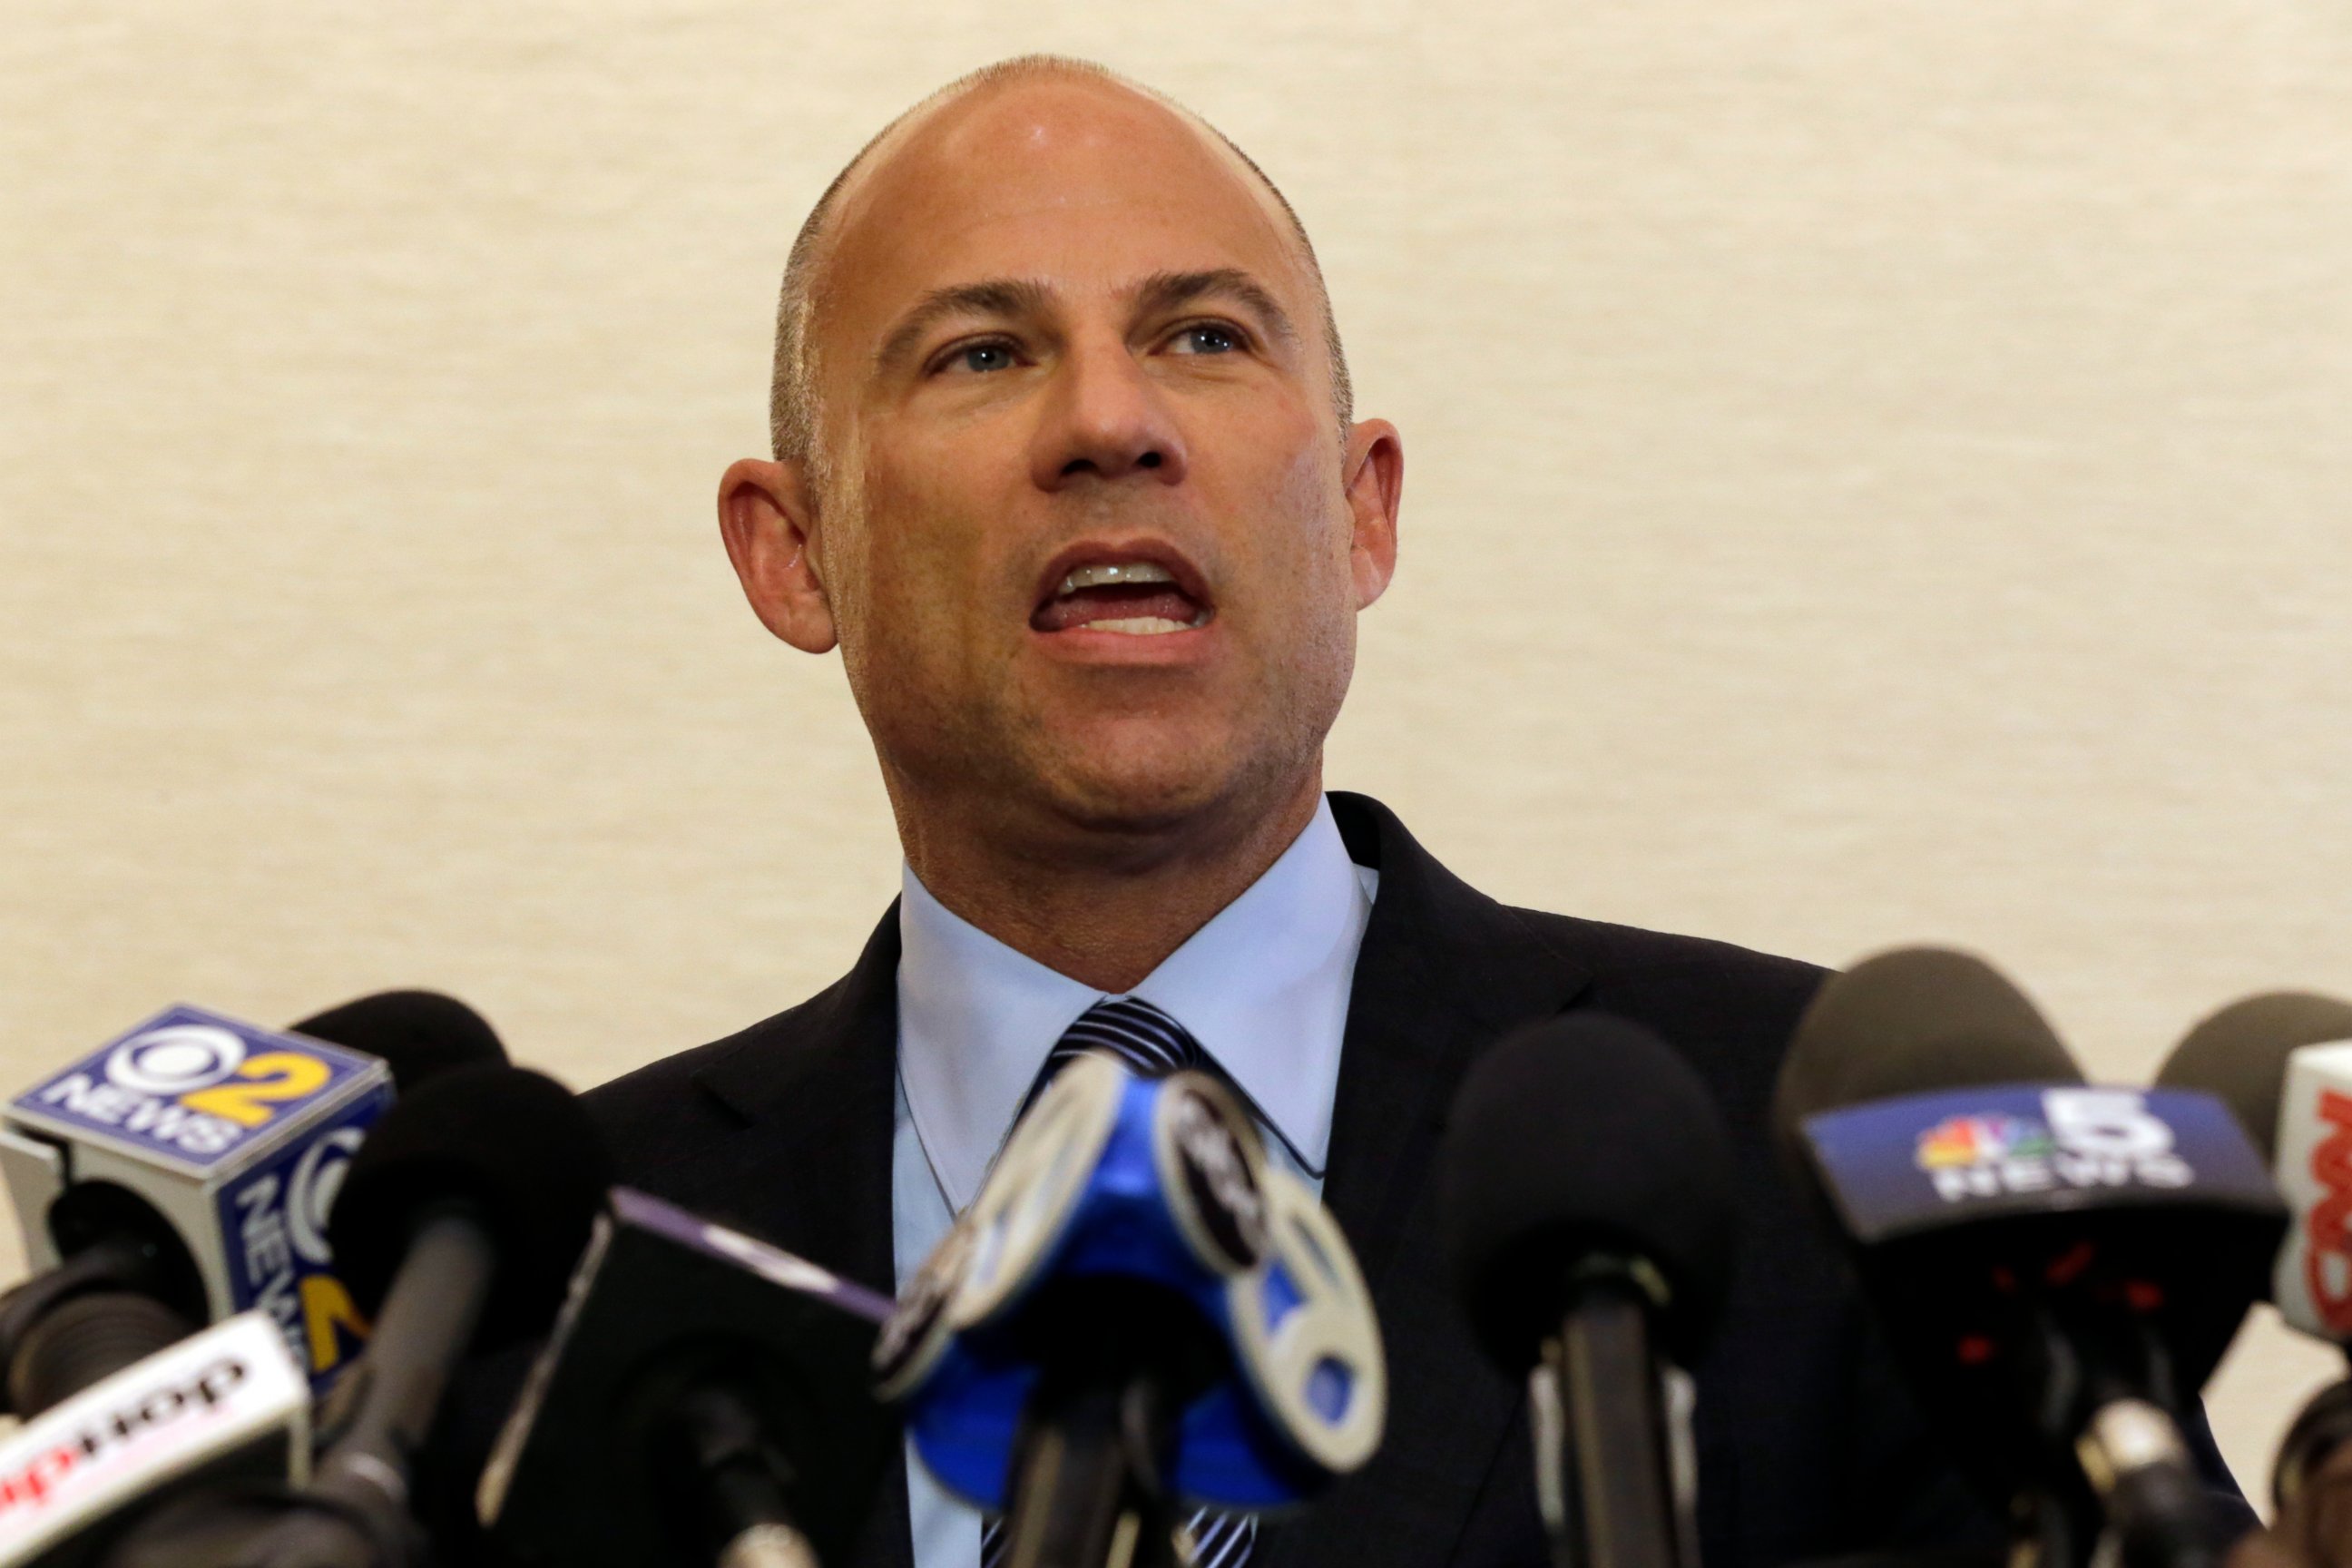 PHOTO: Attorney Michael Avenatti speaks at a news conference, Friday, Feb. 22, 2019, in Chicago. R&B star R. Kelly was charged Friday with aggravated sexual abuse involving four victims, including at least three between the ages of 13 and 17. 